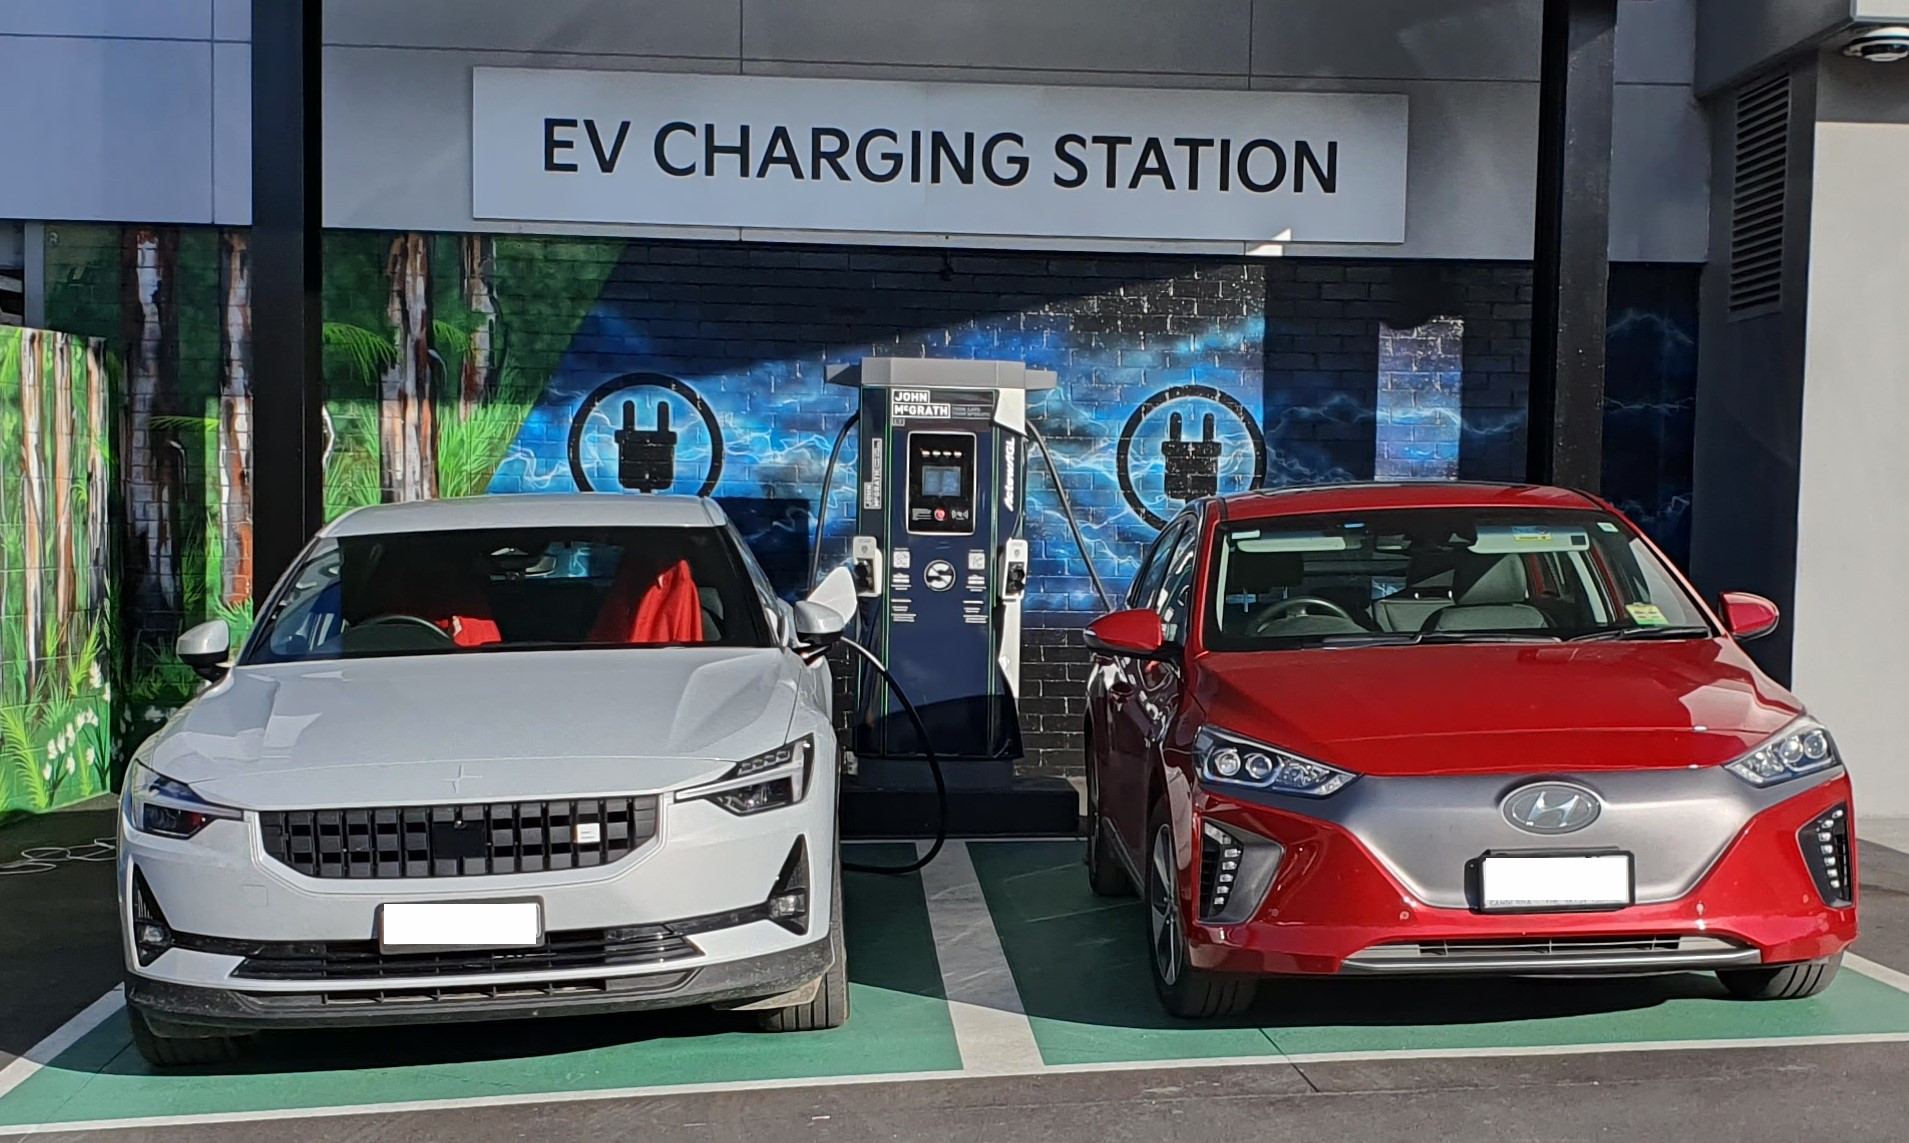 Over 7,000 EV registrations in the ACT